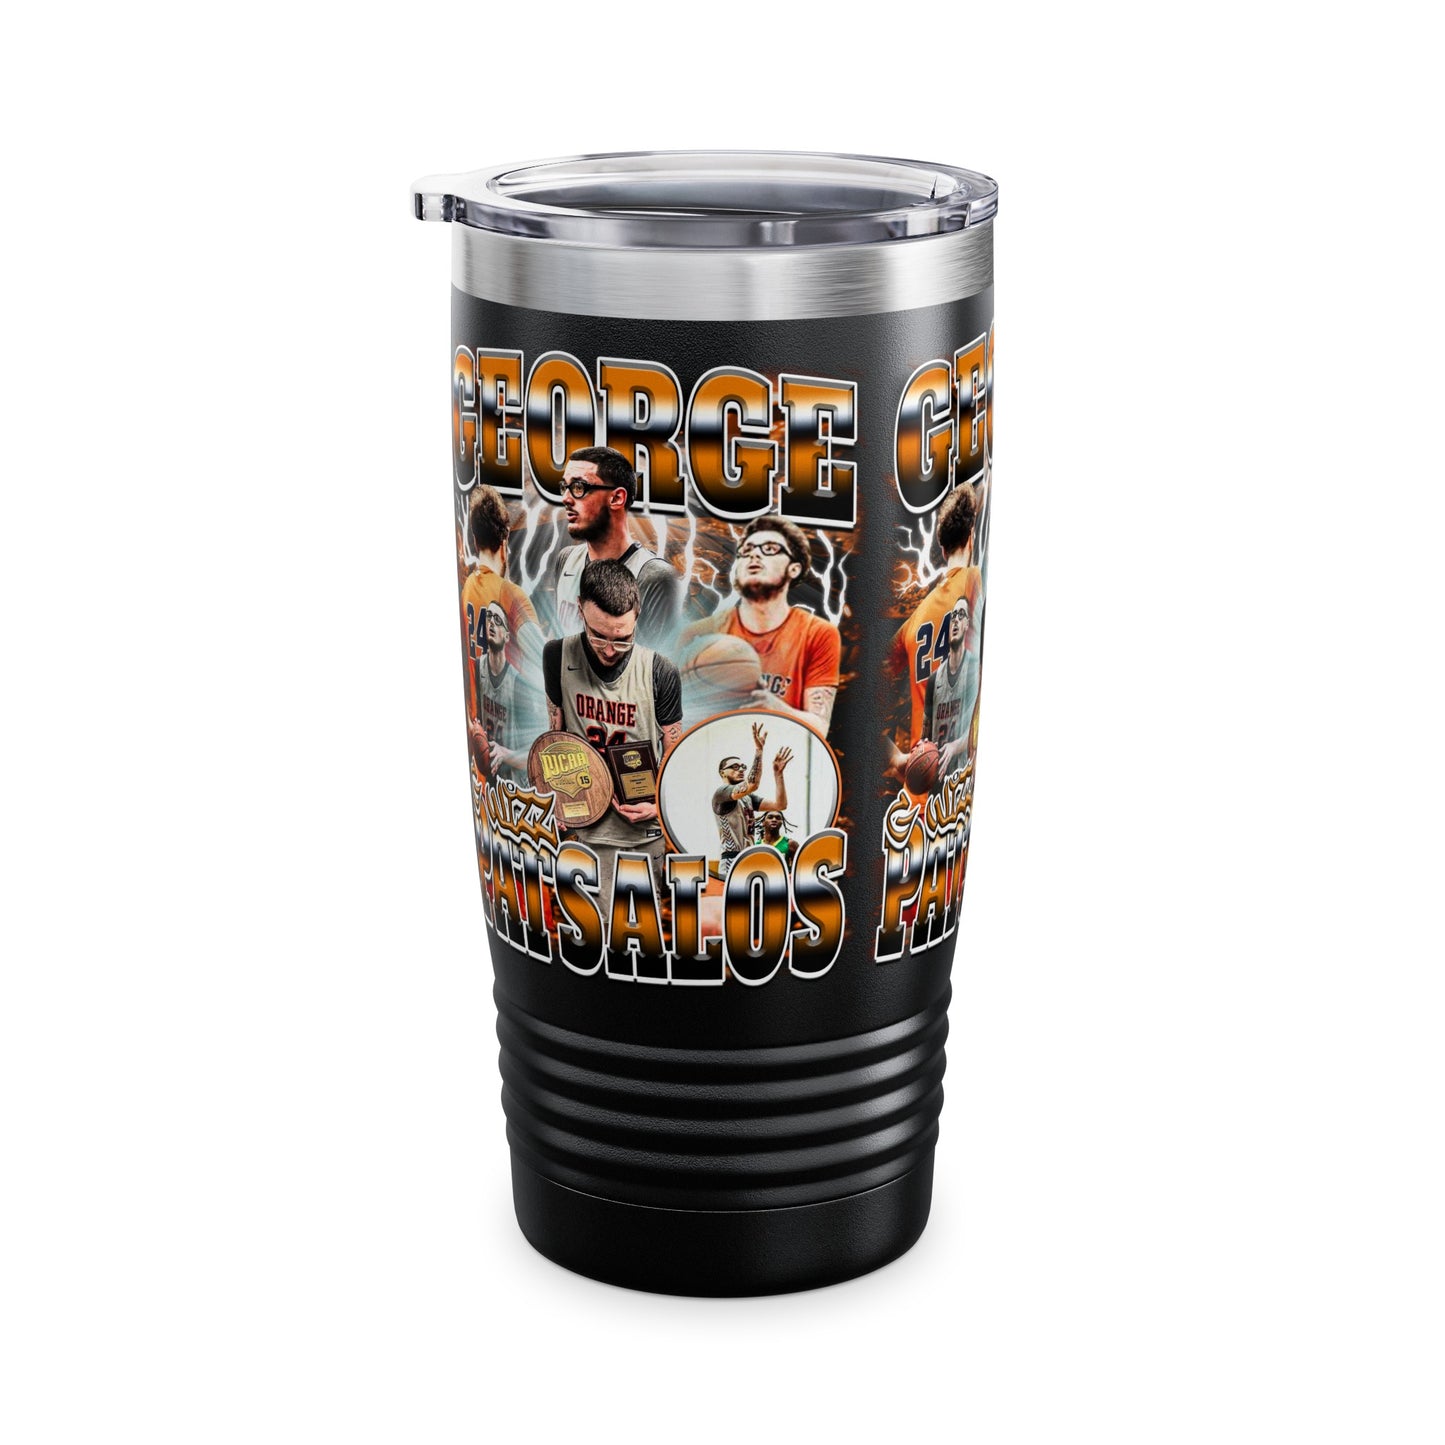 George Patsalos Stainless Steal Tumbler